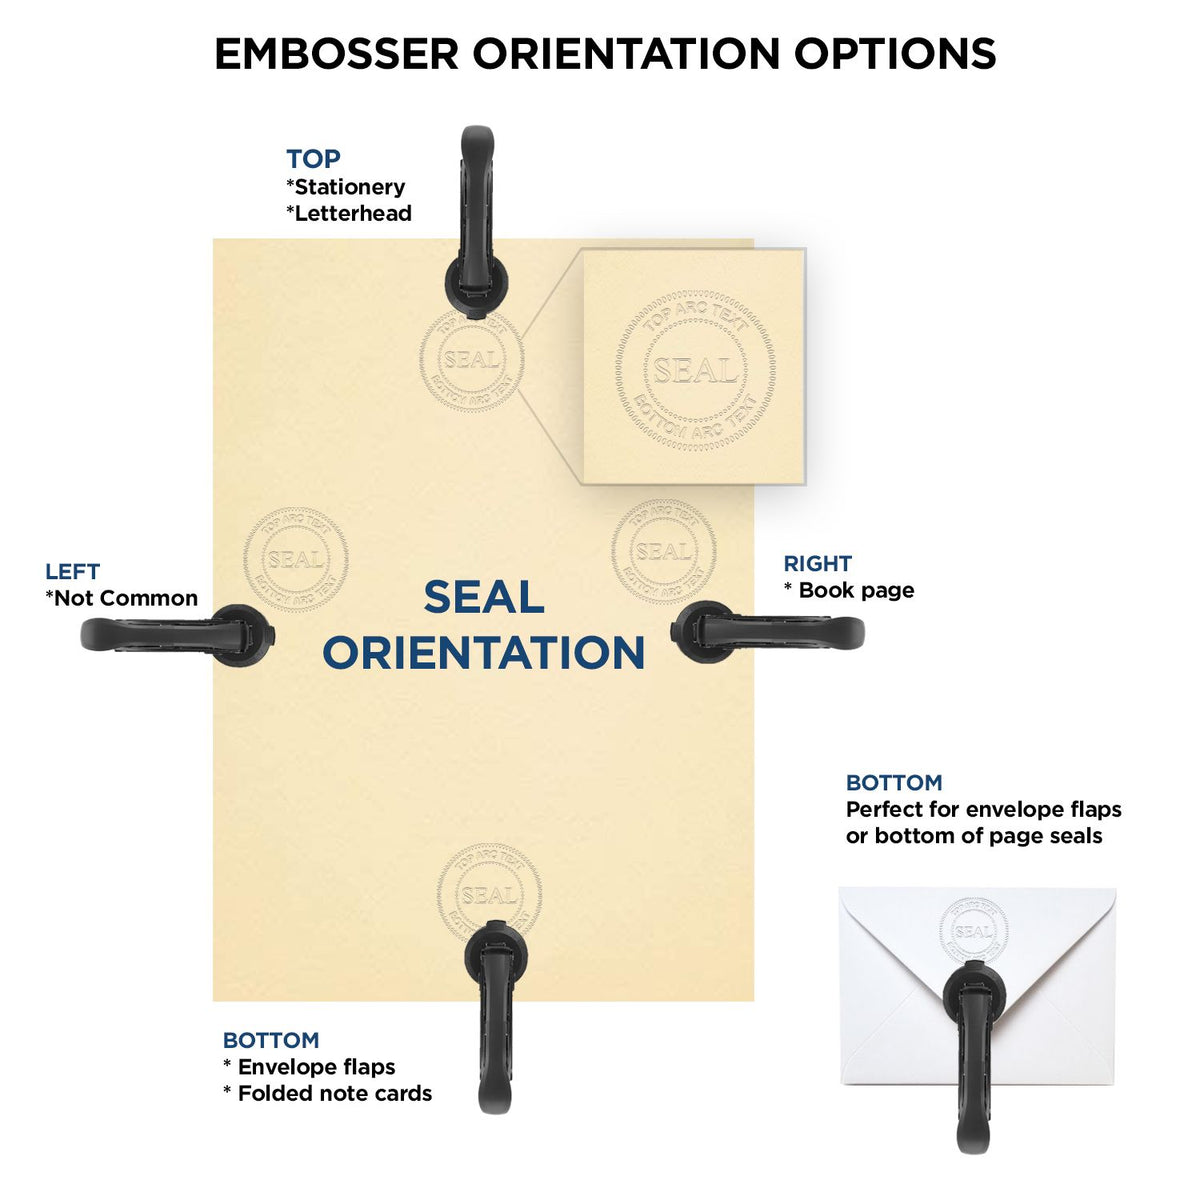 An infographic for the Hybrid Wyoming Land Surveyor Seal showing embosser orientation, this is showing examples of a top, bottom, right and left insert.